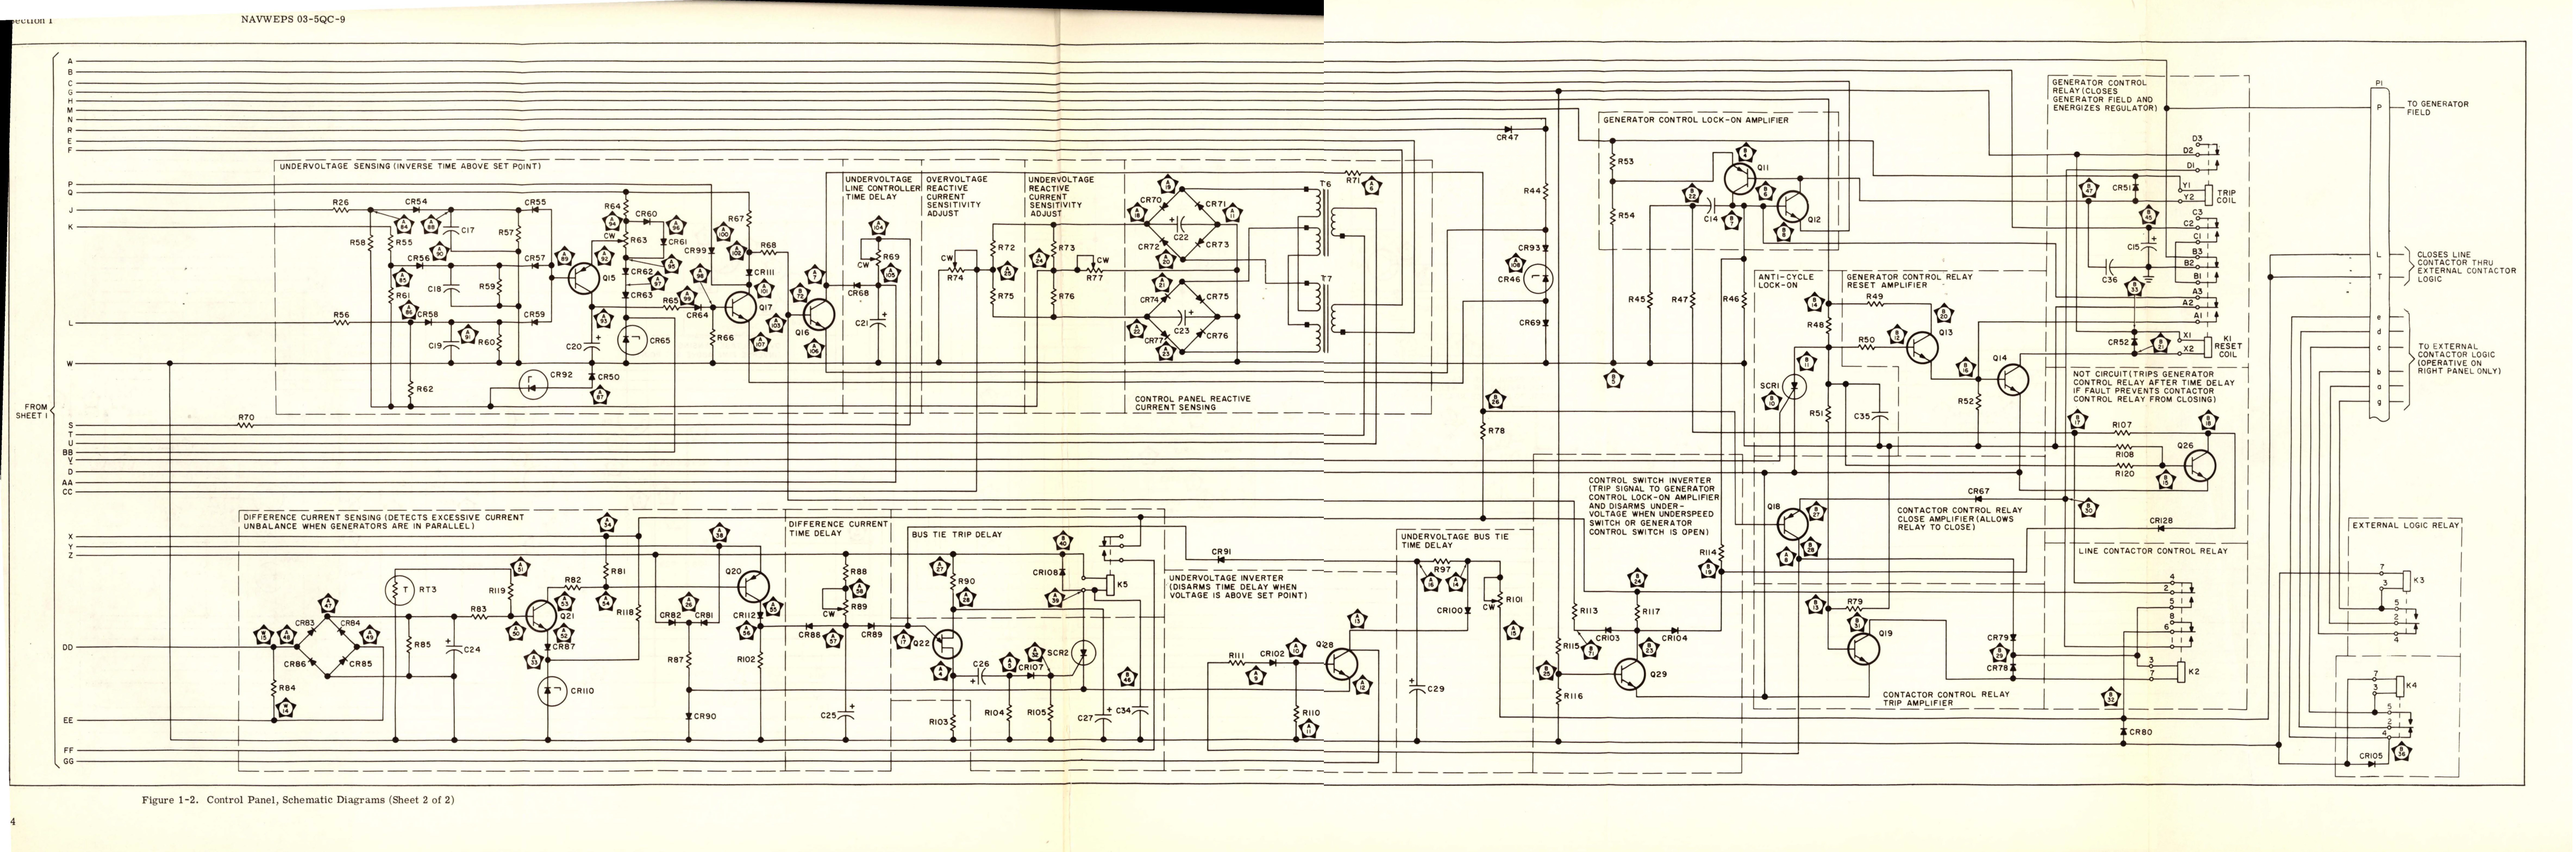 Sample page 8 from AirCorps Library document: Overhaul Instructions for Control Panel - Type 21B30-3-A